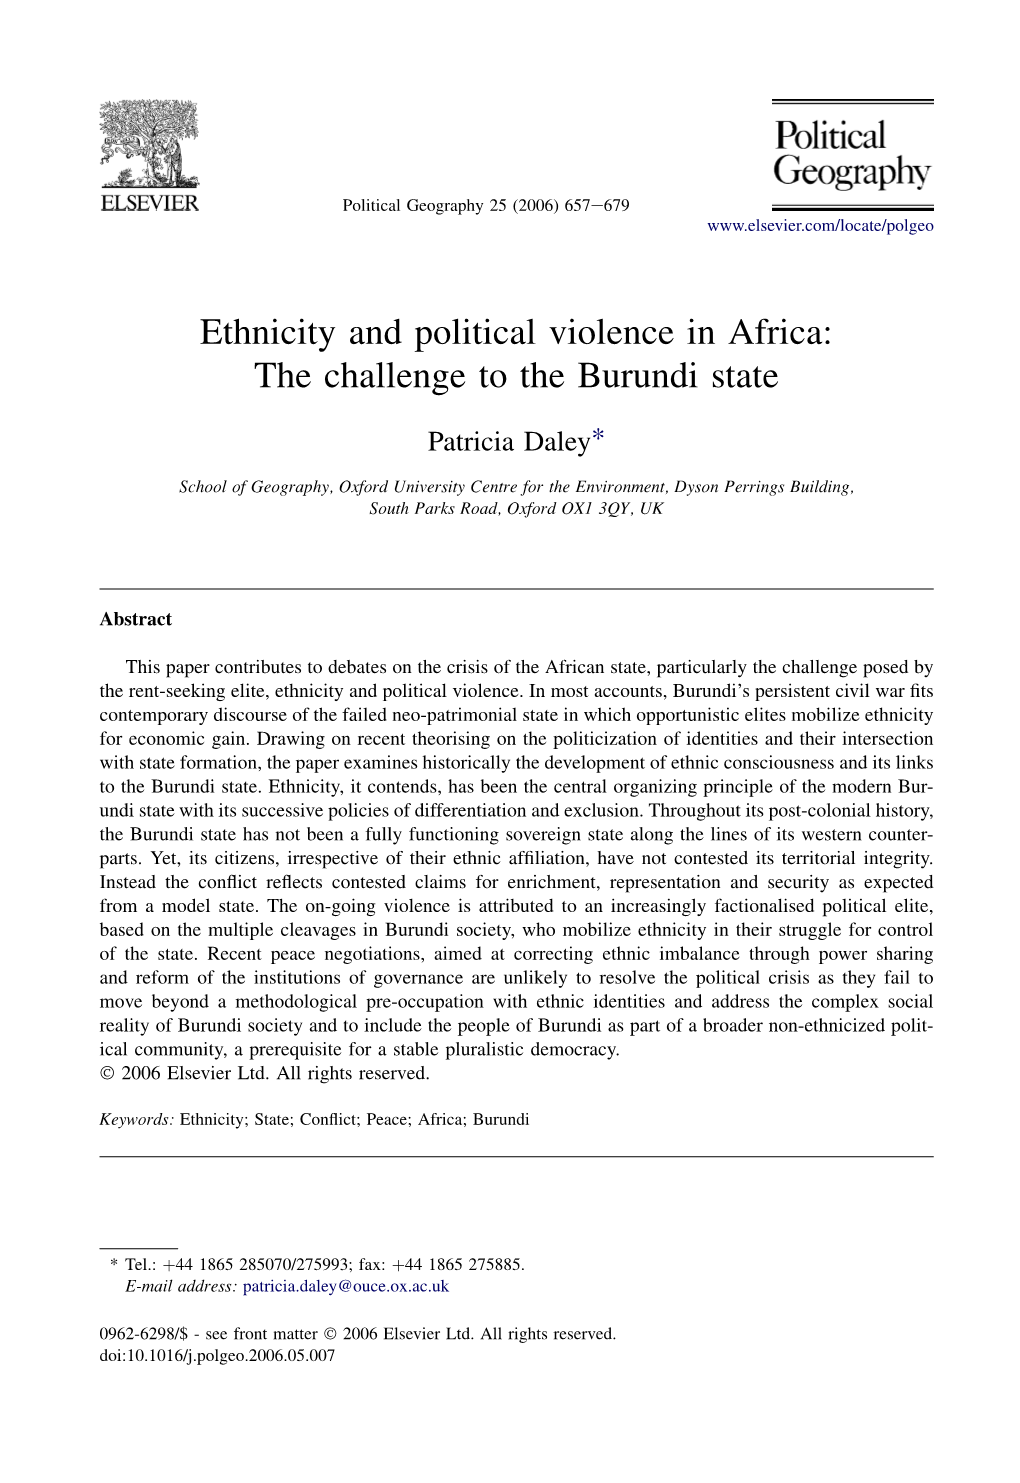 Ethnicity and Political Violence in Africa: the Challenge to the Burundi State